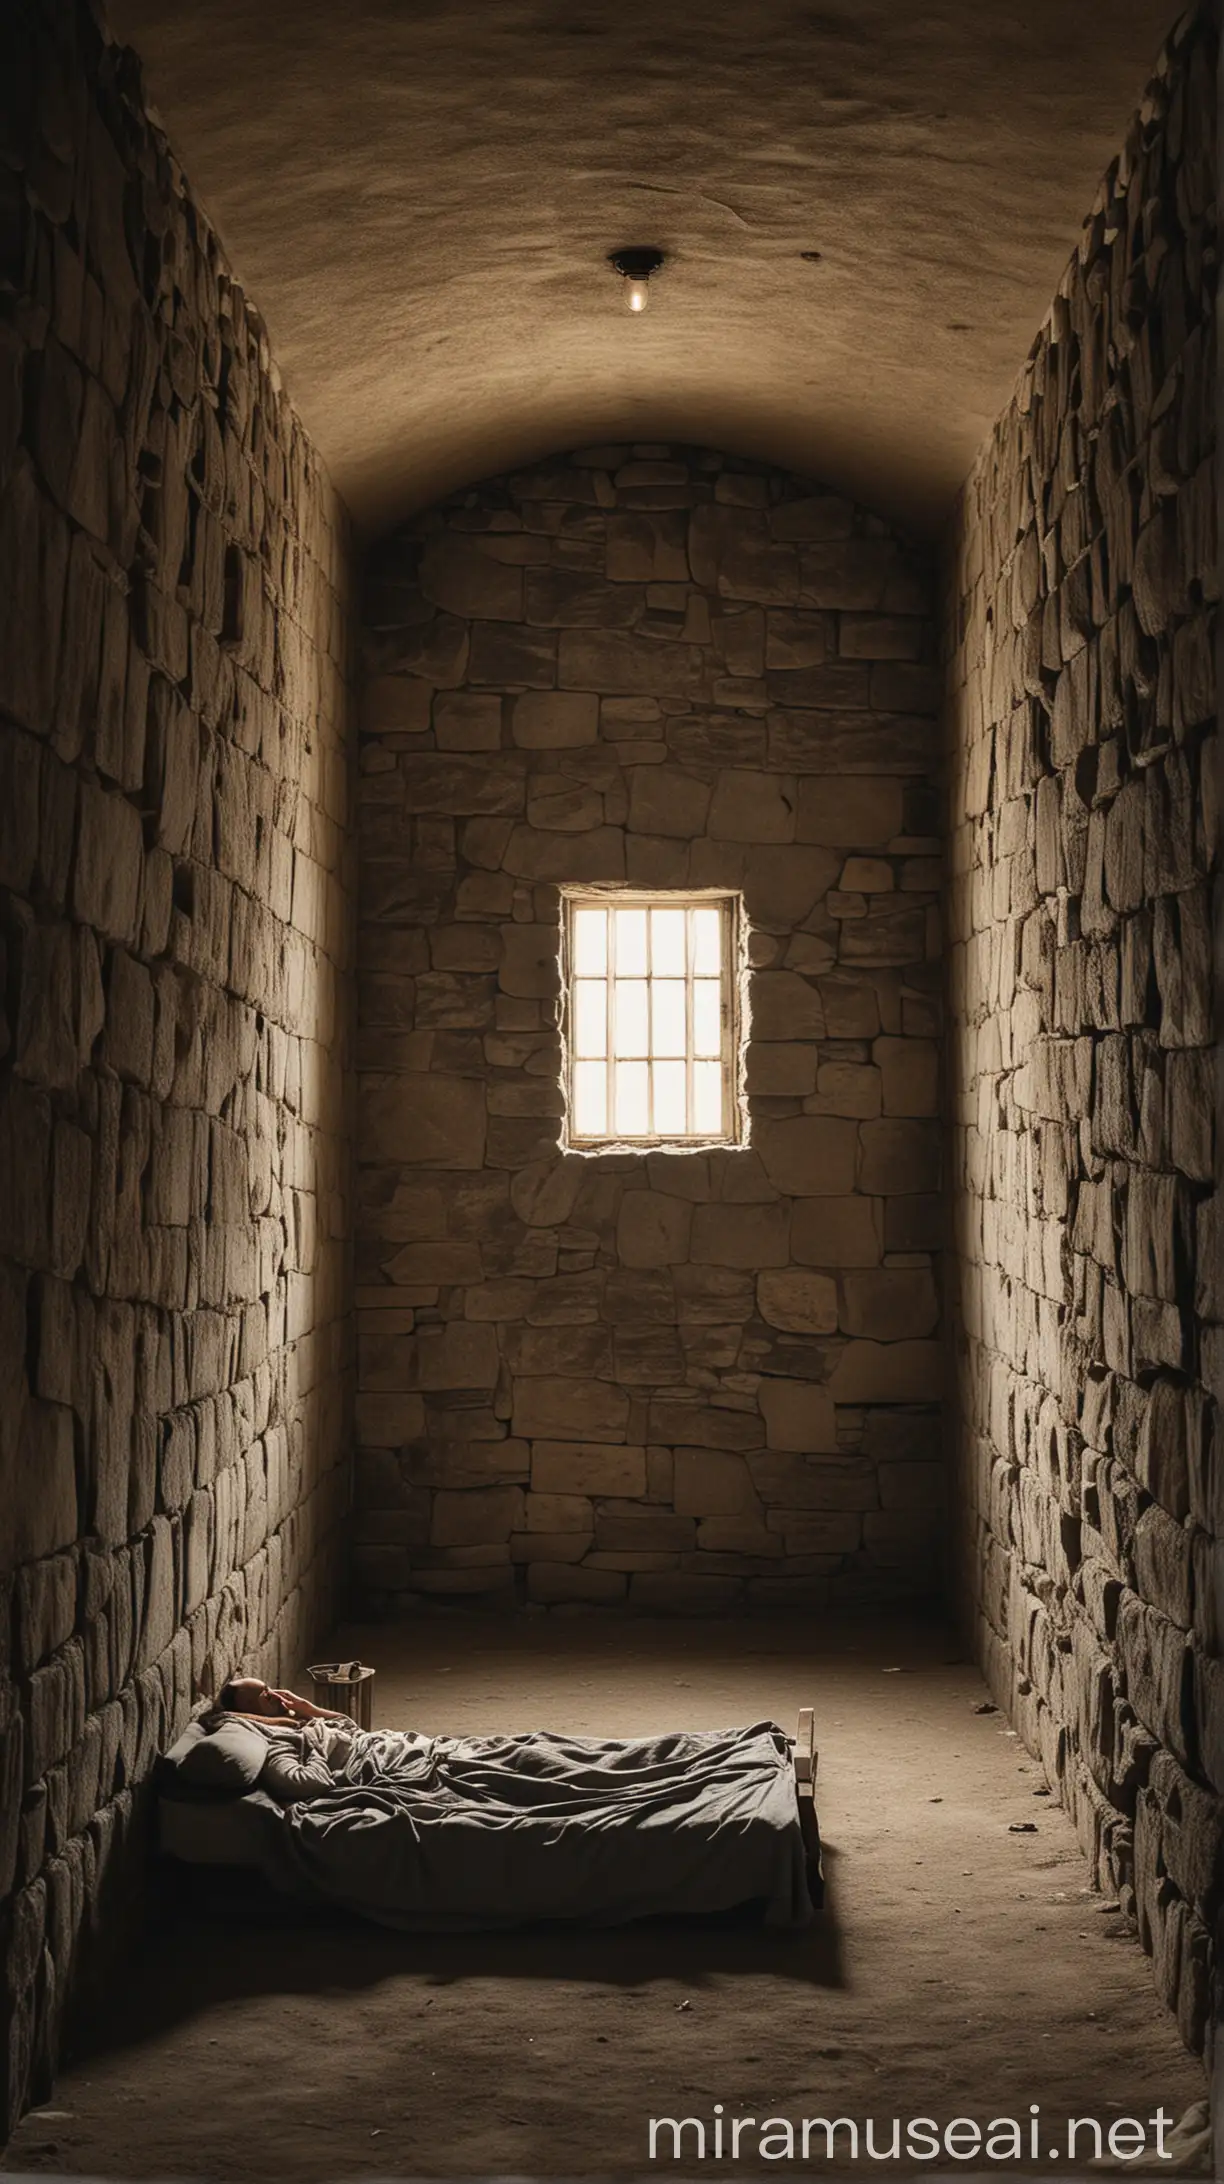 Prompt: "Jeremiah is confined in a small, dark room with stone walls, sitting or lying down in a weary posture. The room has sparse furnishings, indicating it as a prison cell. Light filters in through a small window."in ancient world 